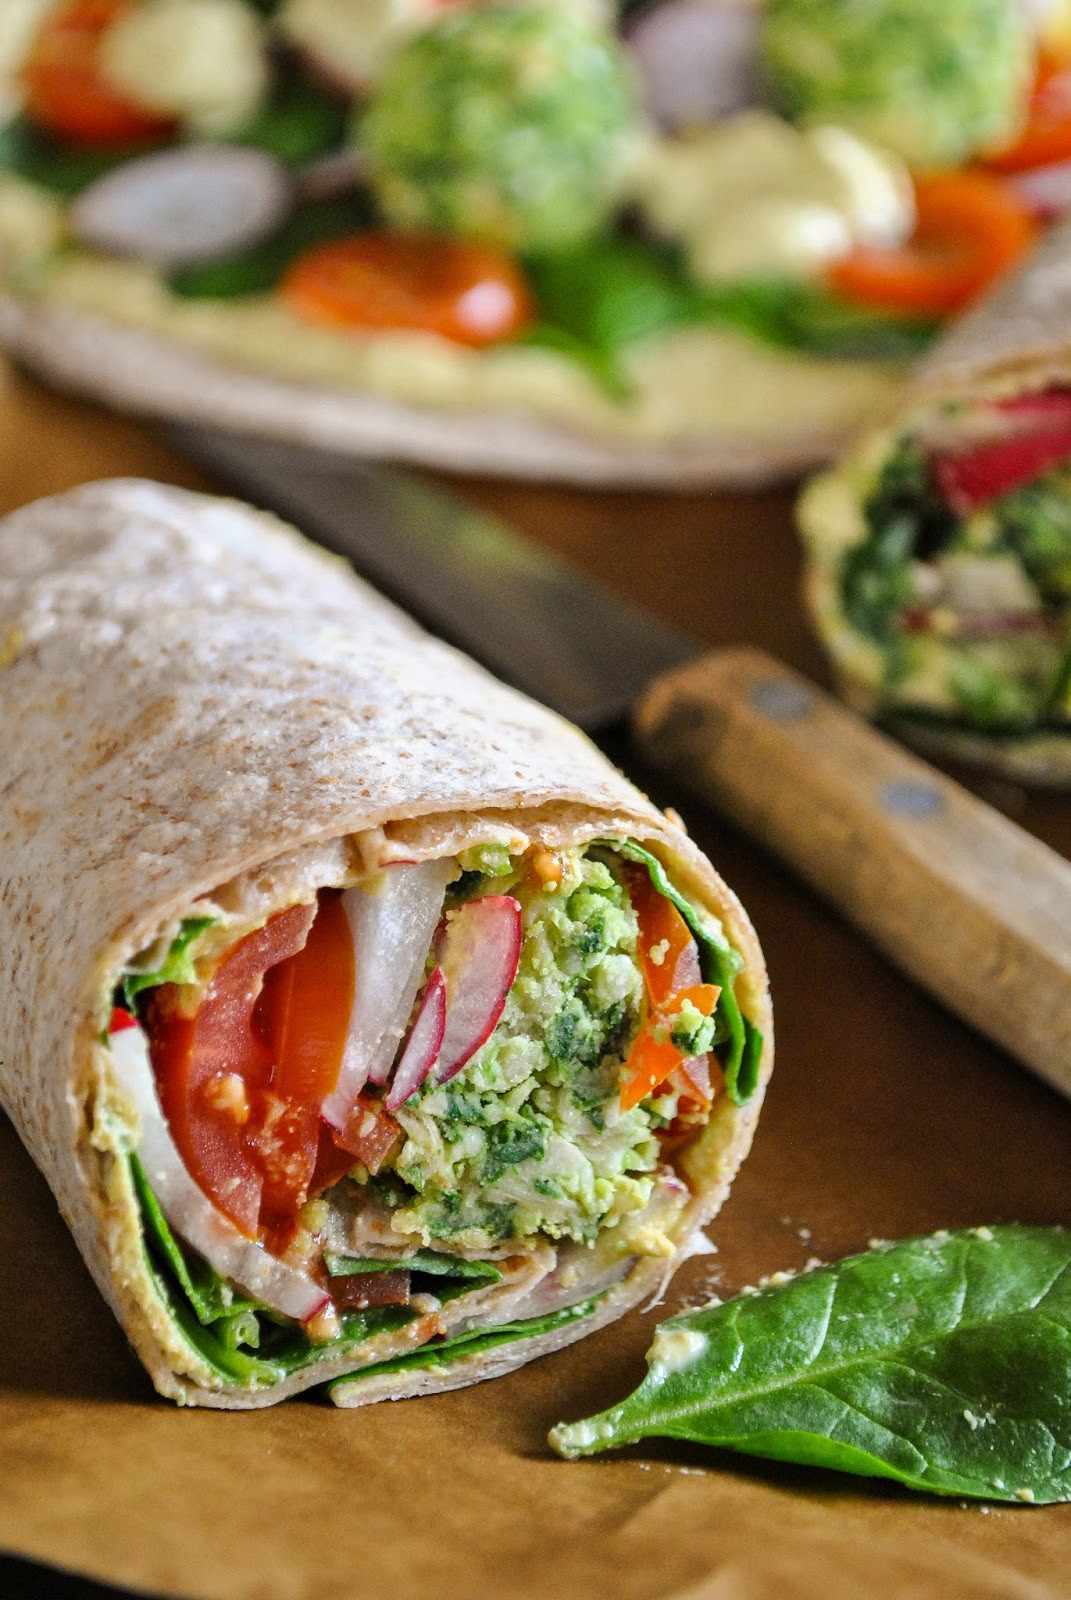 Vegetarian Wrap Recipes
 Vegan wraps with baked spinach balls and lemony dressing